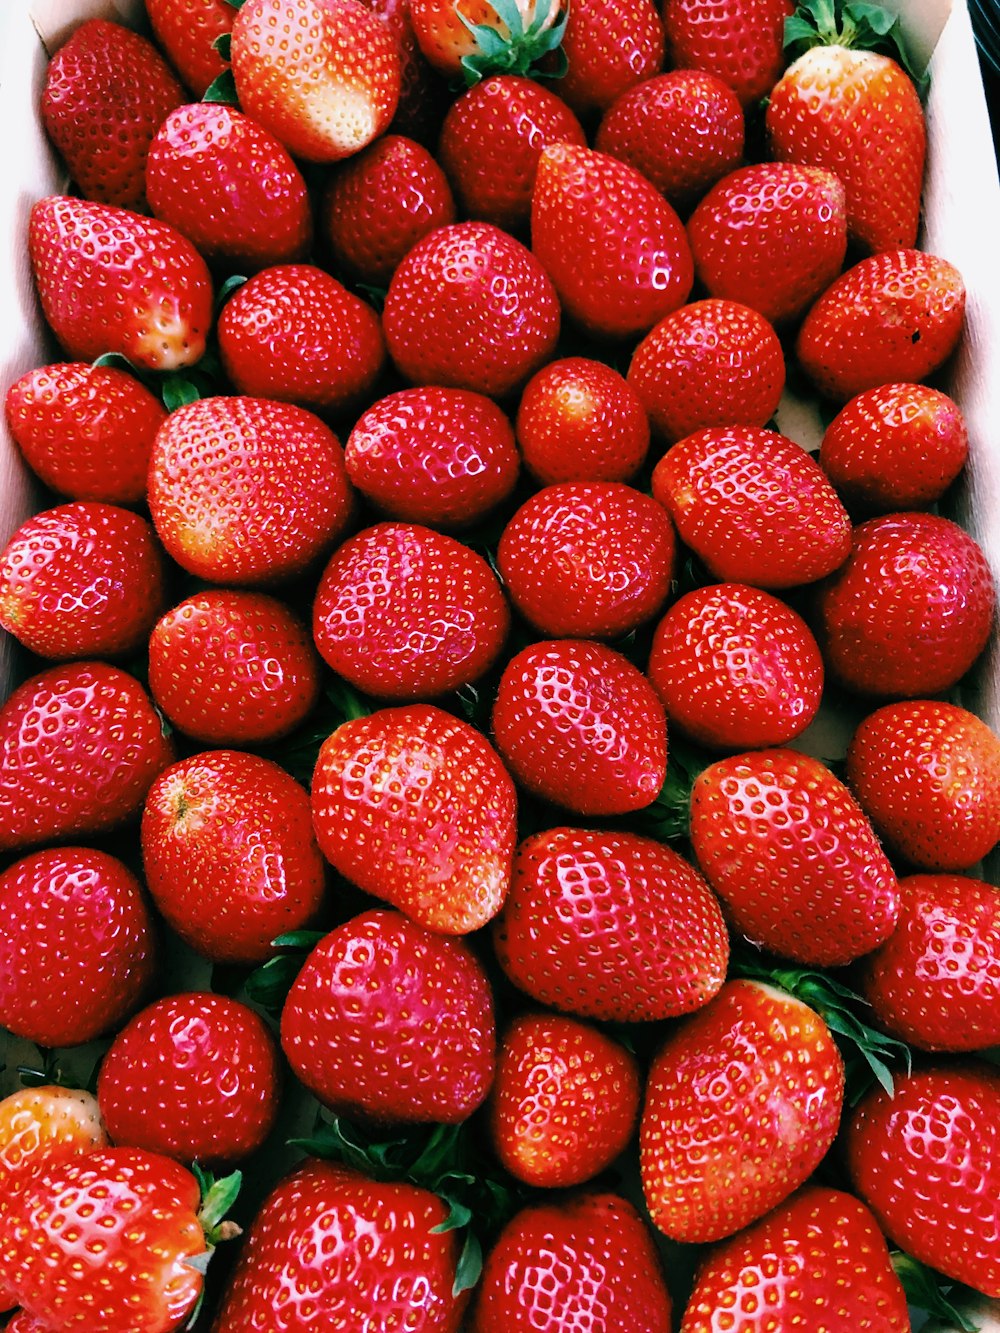 100+ Strawberry Pictures | Download Free Images on Unsplash